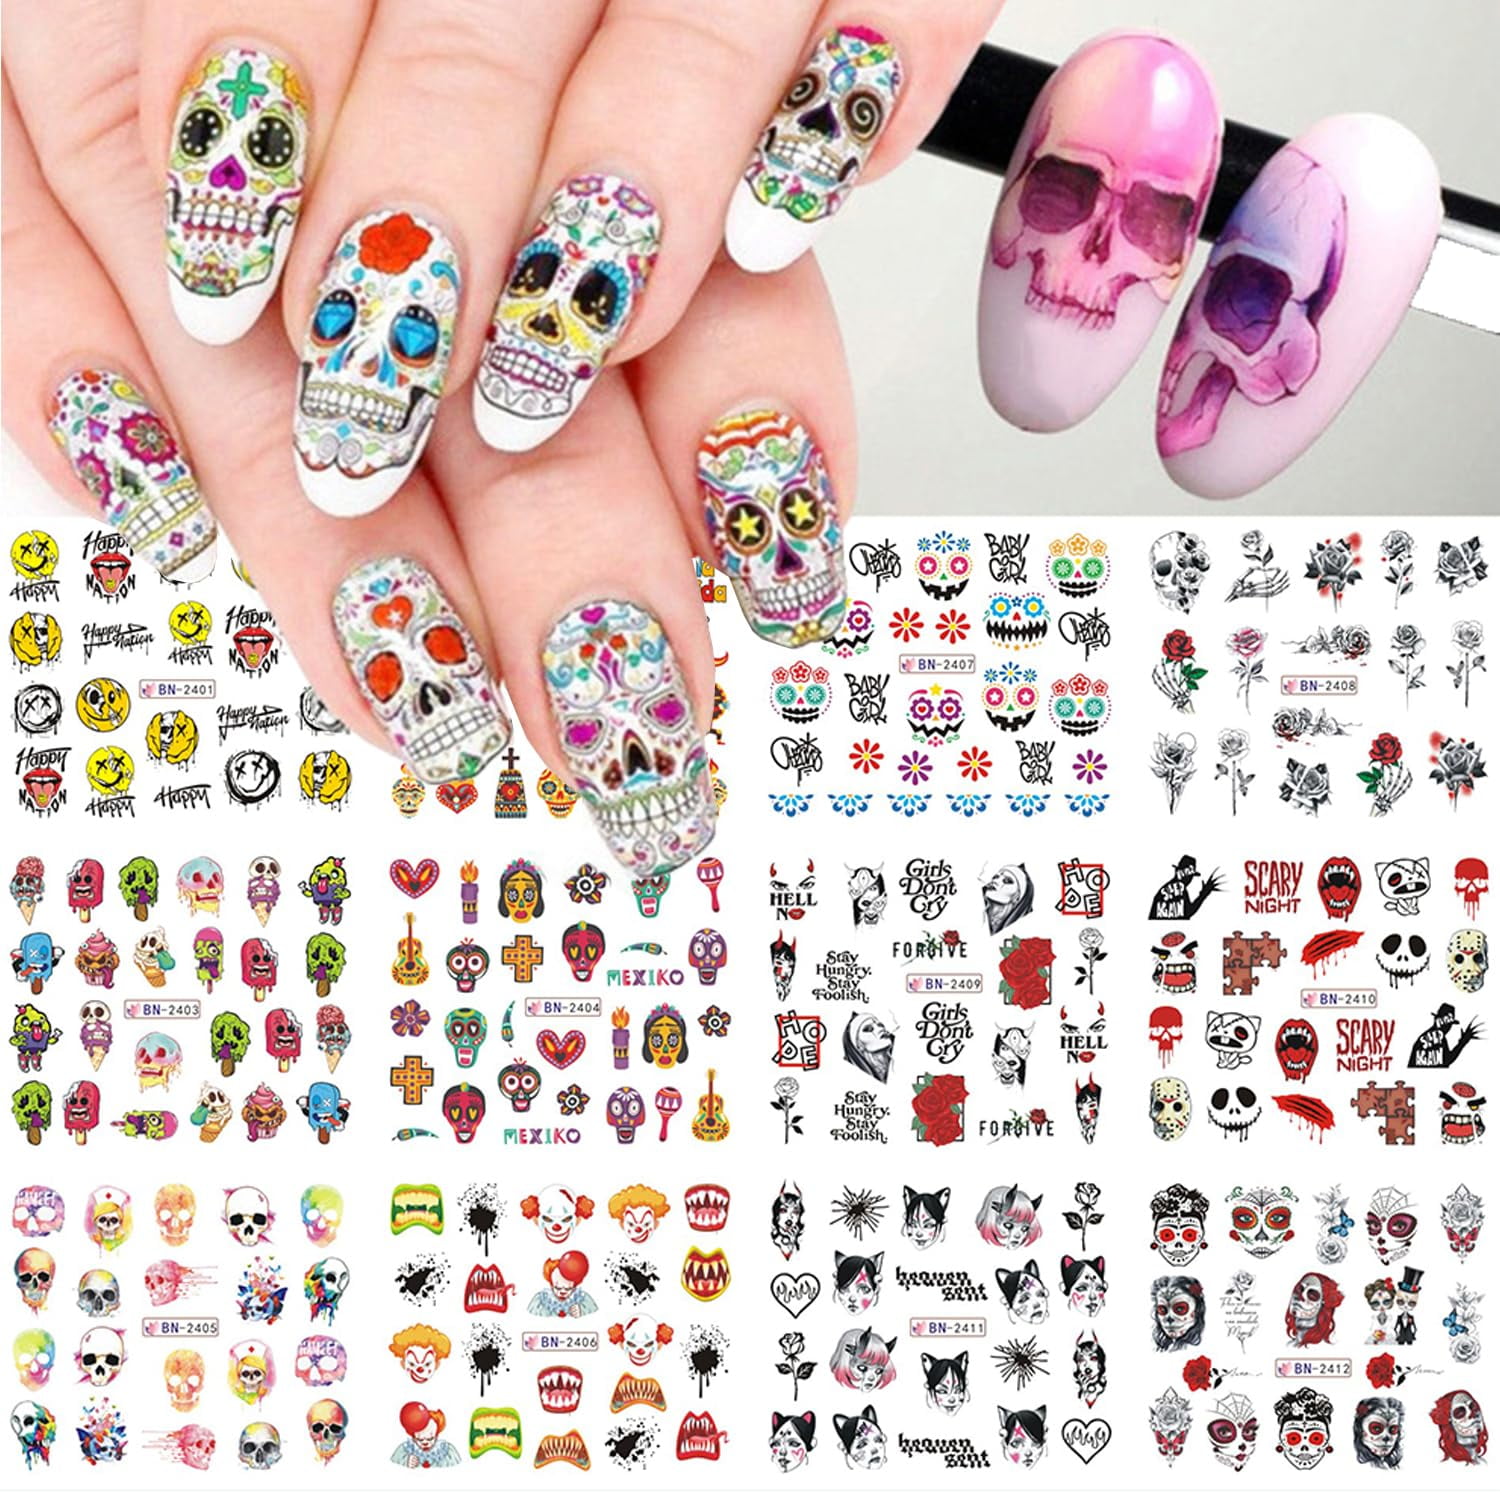 Amazon.com: SILPECWEE 11 Sheets Black Nail Stickers for Women Girl Kids 3D Nail  Art Stickers Decals Self Adhesive Stickers for Nails Geometry Nail Designs  Stickers Fingernail Manicure Sticker Nail Decoration : Beauty